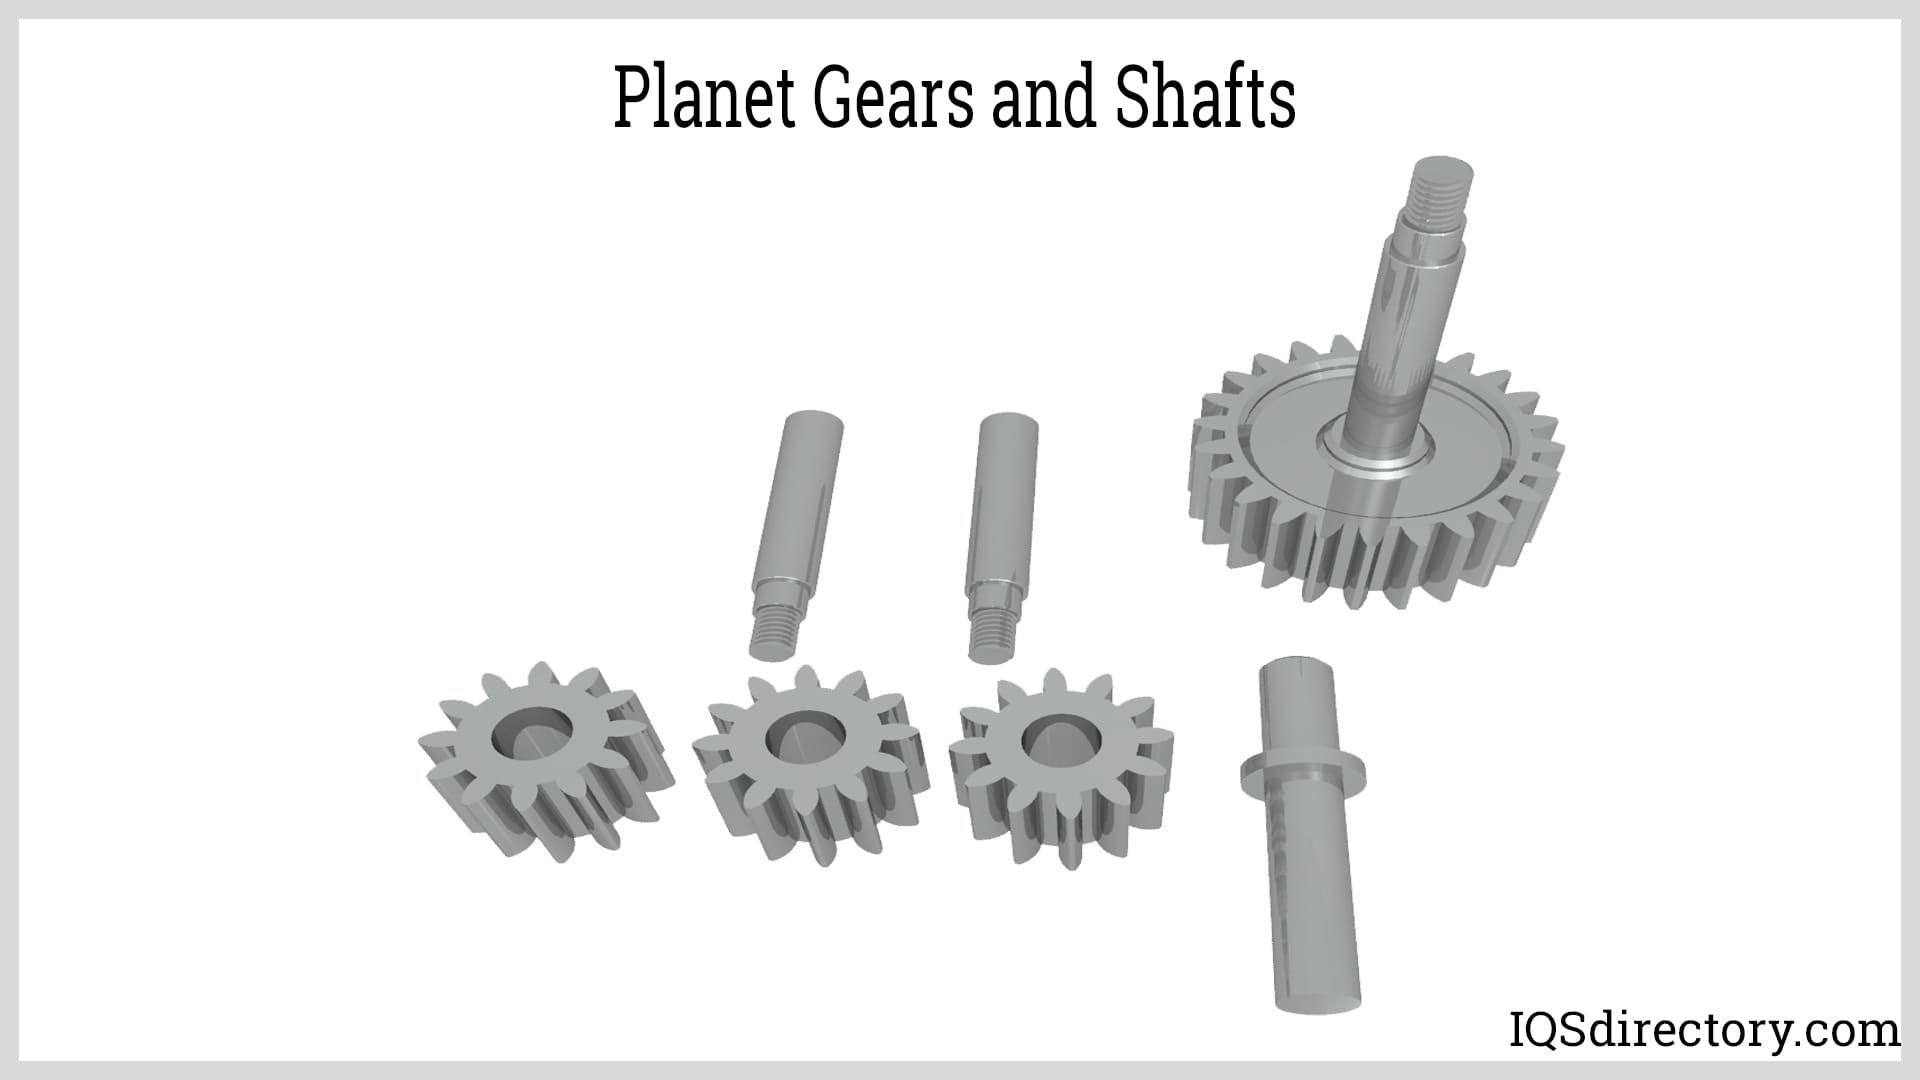 Planet Gears and Shafts